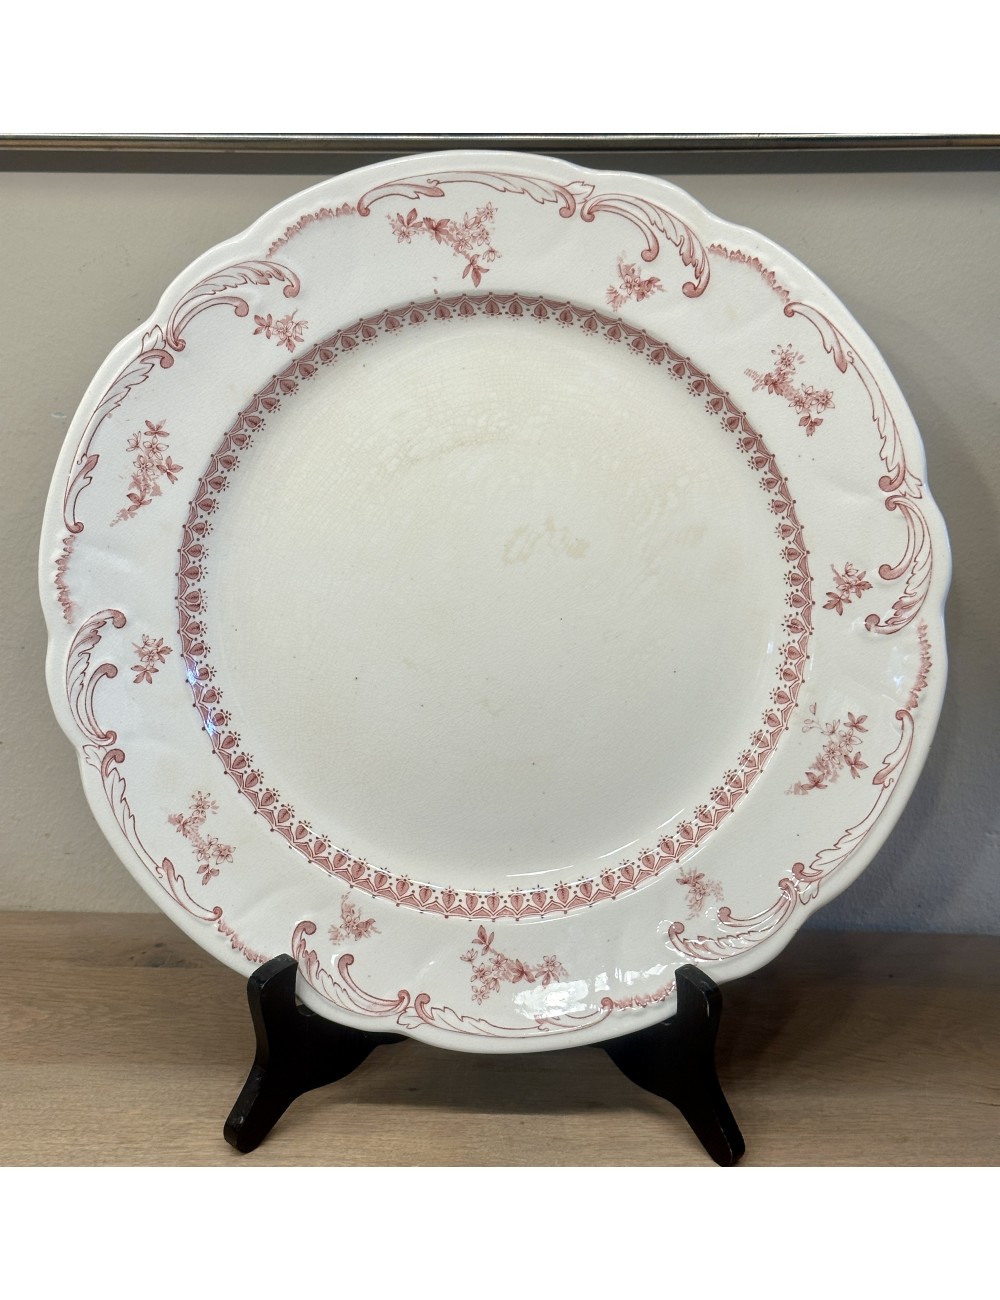 Plate - large round model - Ridgeways England - décor LORNA in red